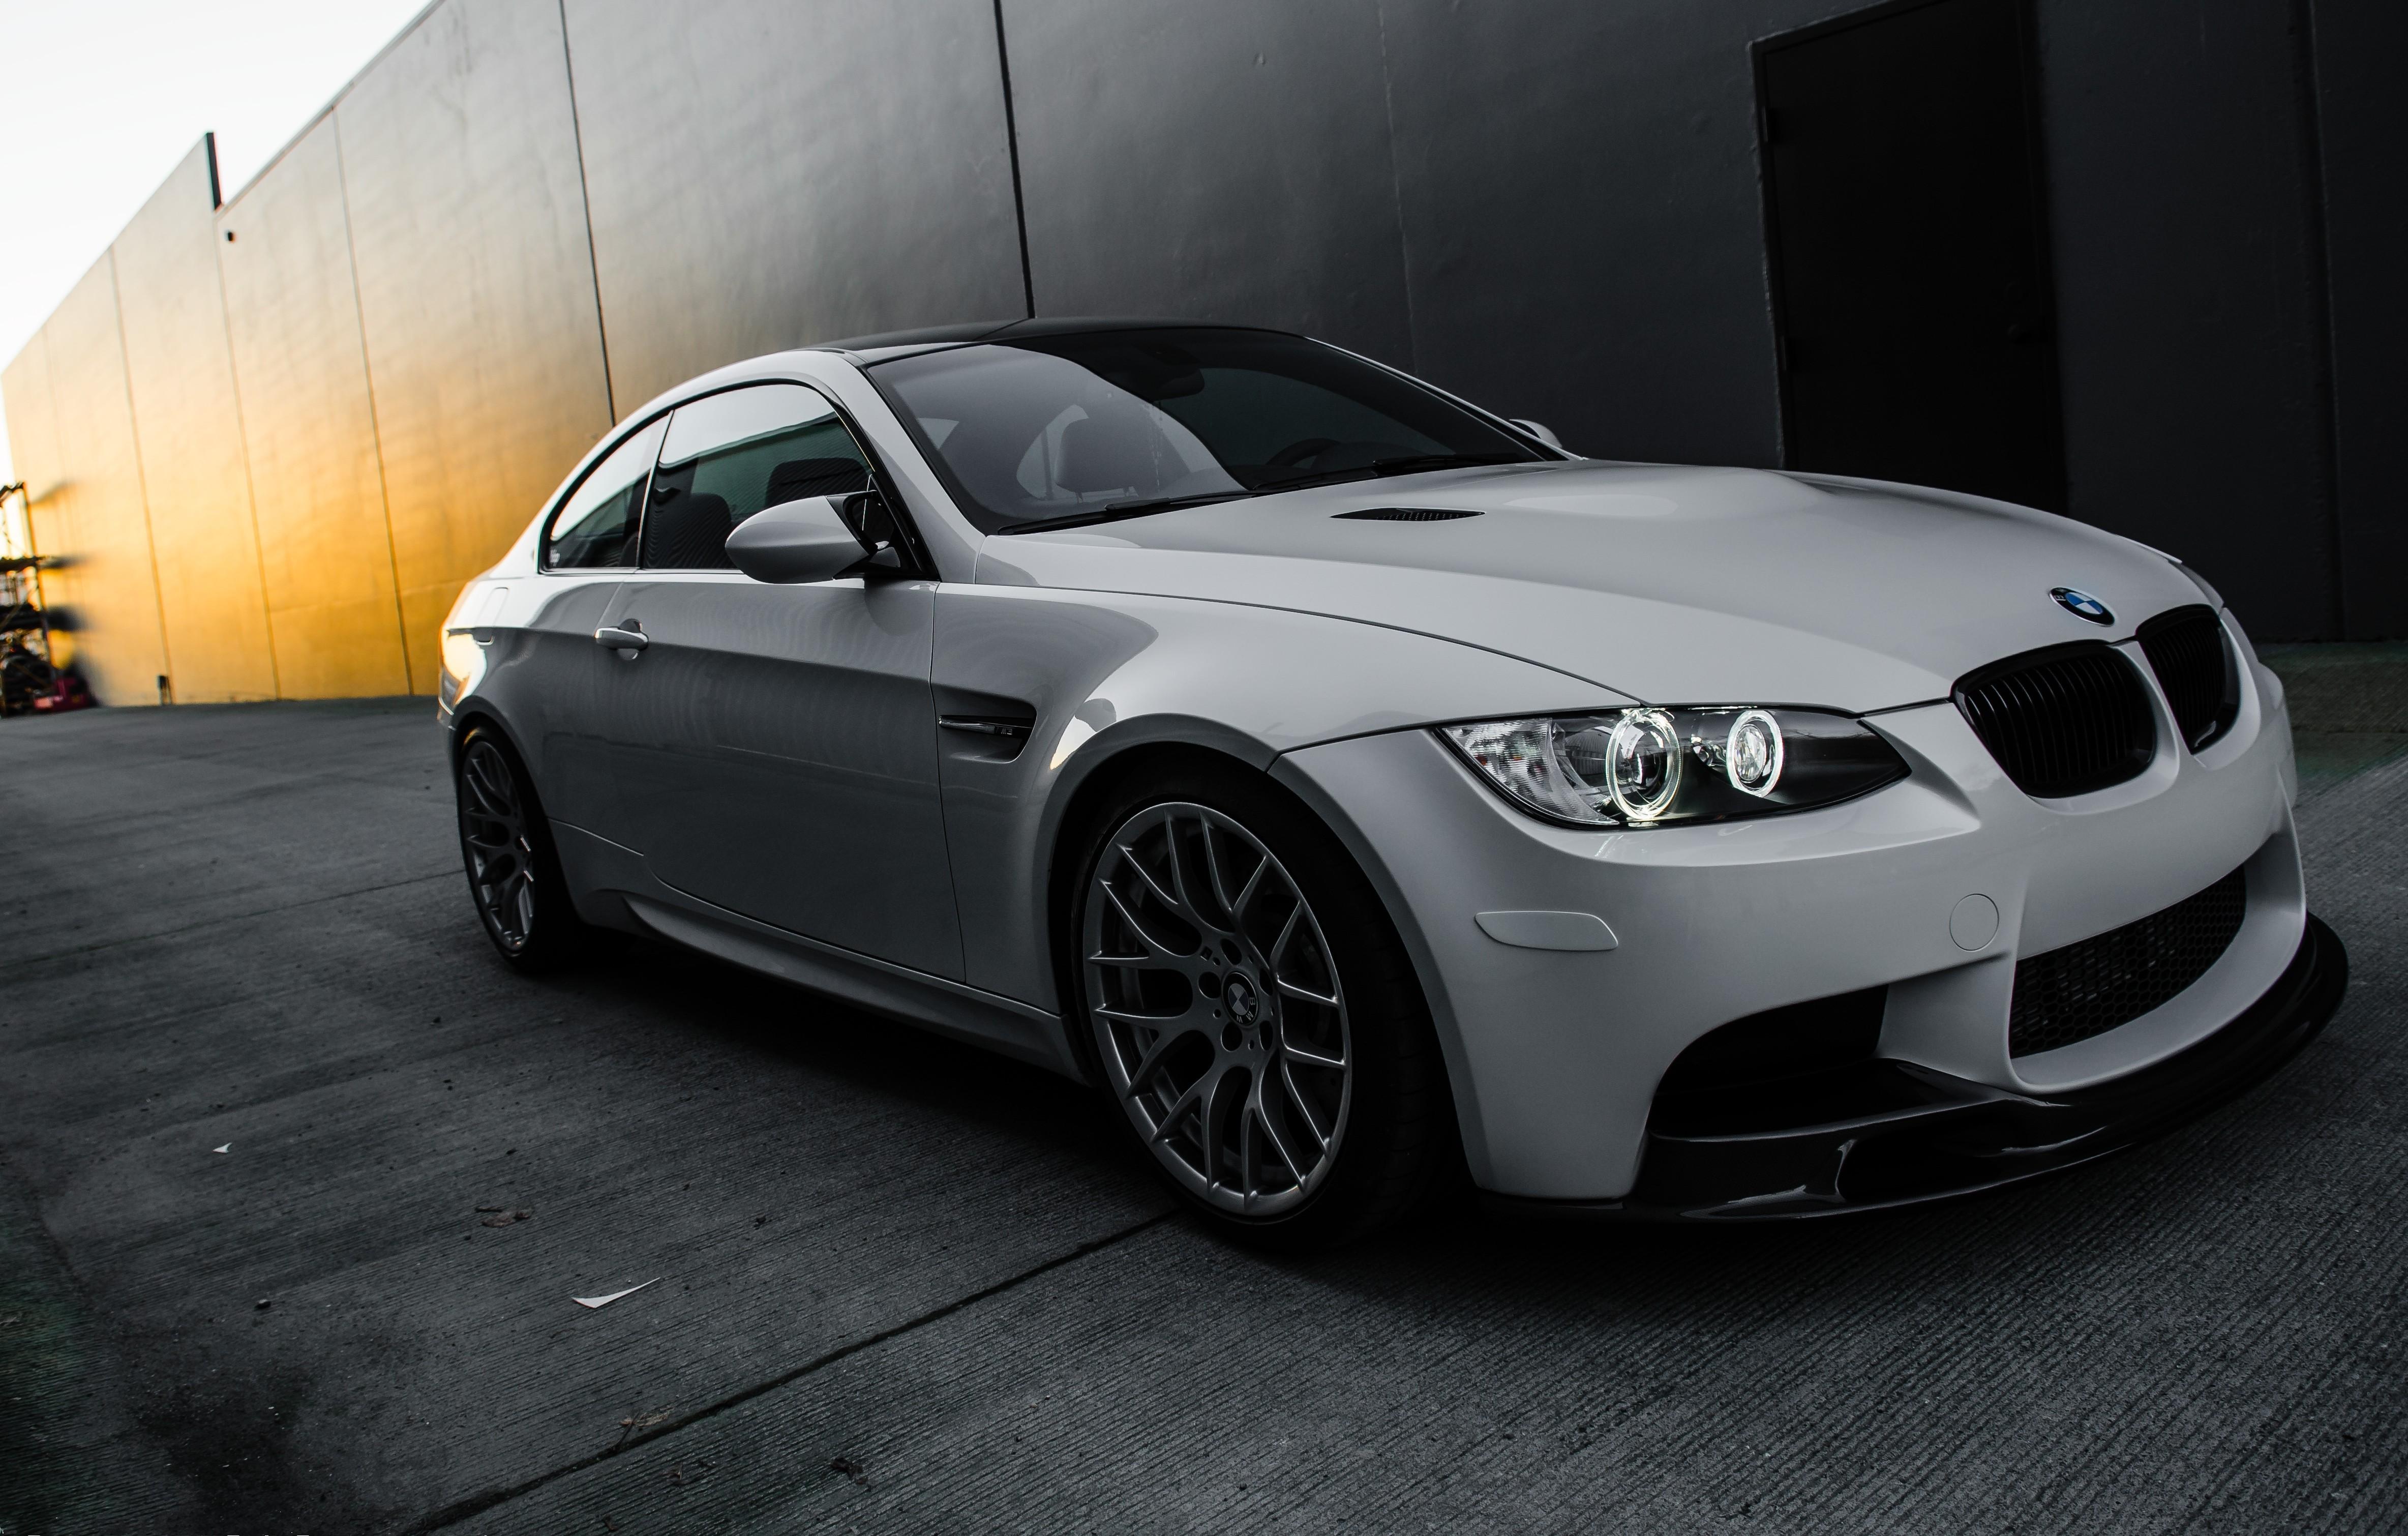 4736 x 3020 · jpeg - BMW, Car Wallpapers HD / Desktop and Mobile Backgrounds